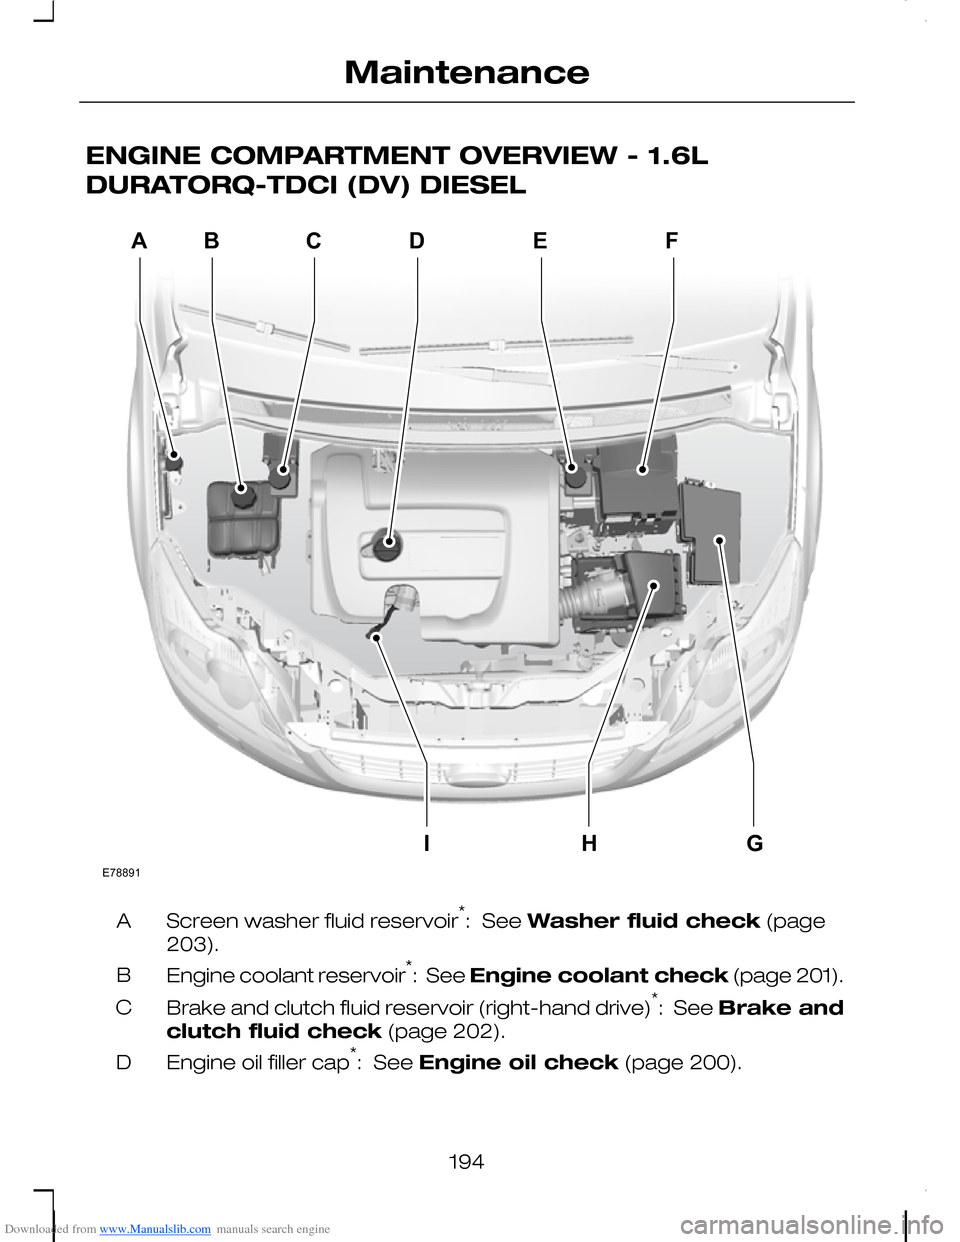 FORD C MAX 2008 1.G User Guide Downloaded from www.Manualslib.com manuals search engine ENGINE COMPARTMENT OVERVIEW - 1.6L
DURATORQ-TDCI (DV) DIESEL
Screen washer fluid reservoir*:  See Washer fluid check (page
203).
A
Engine coola